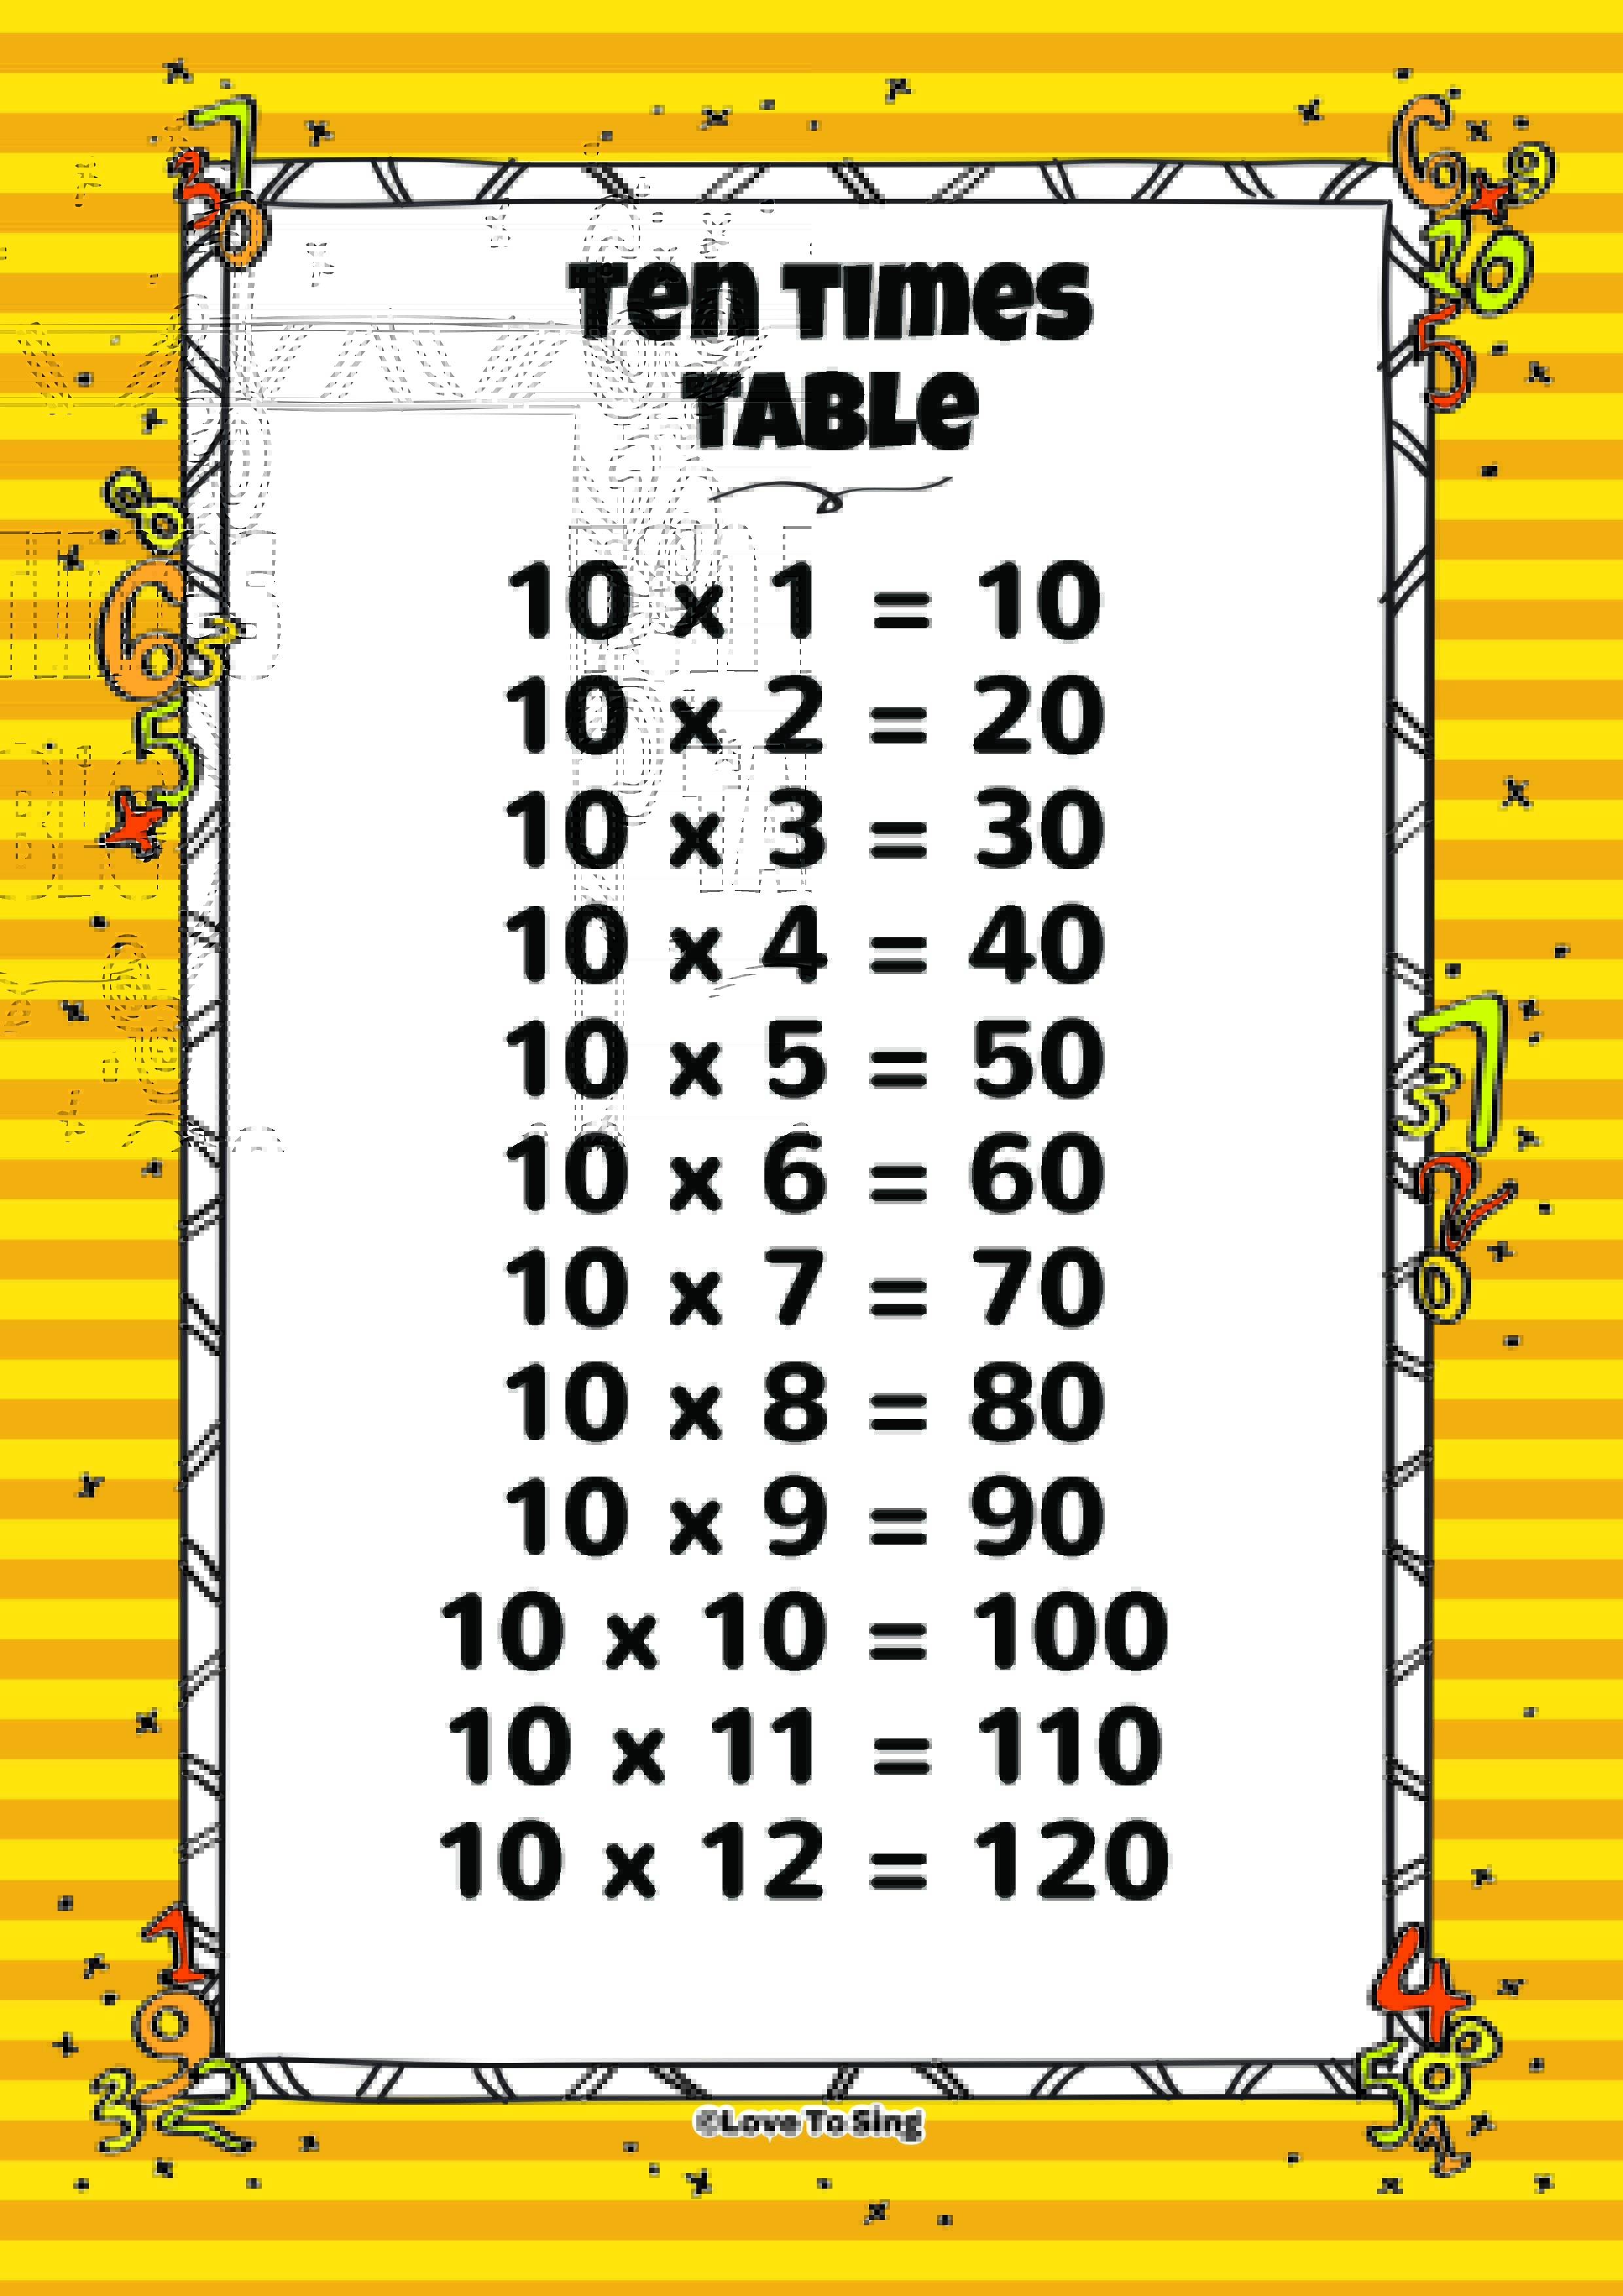 Ten Times Table And Random Test | Kids Video Song with FREE Lyrics